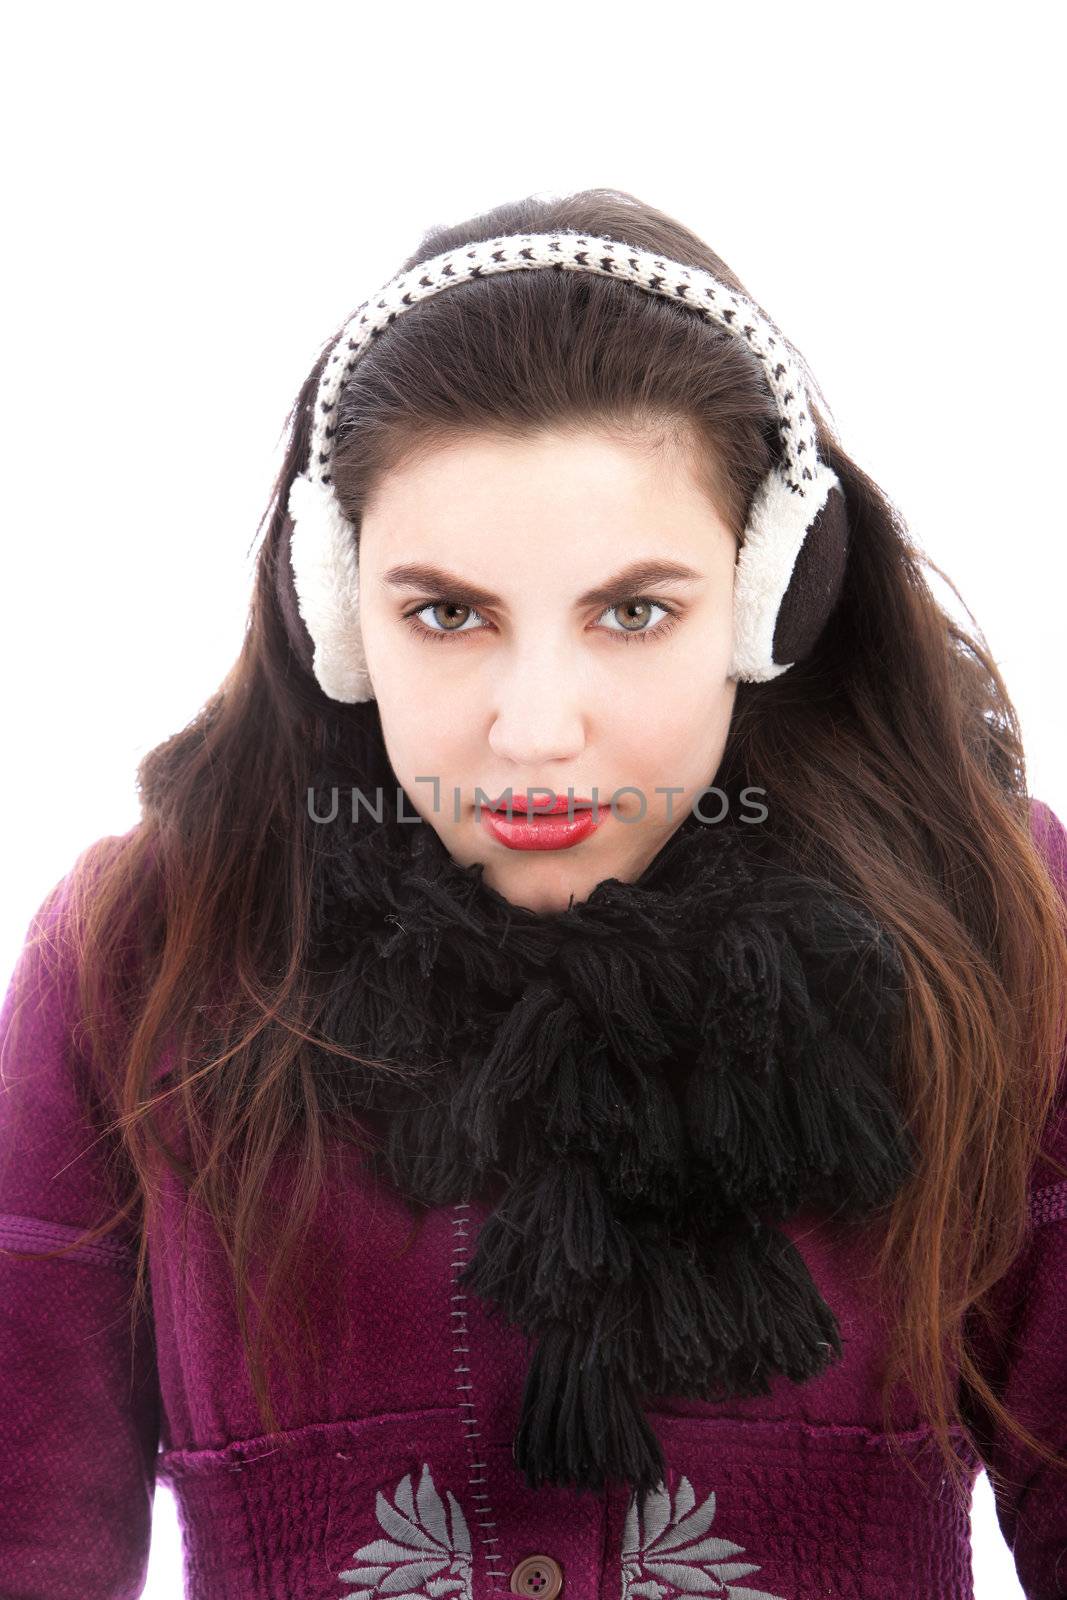 Cold woman wearing ear muffs and a thick winter scarf snuggling down into her clothing on a winter day isolated on white